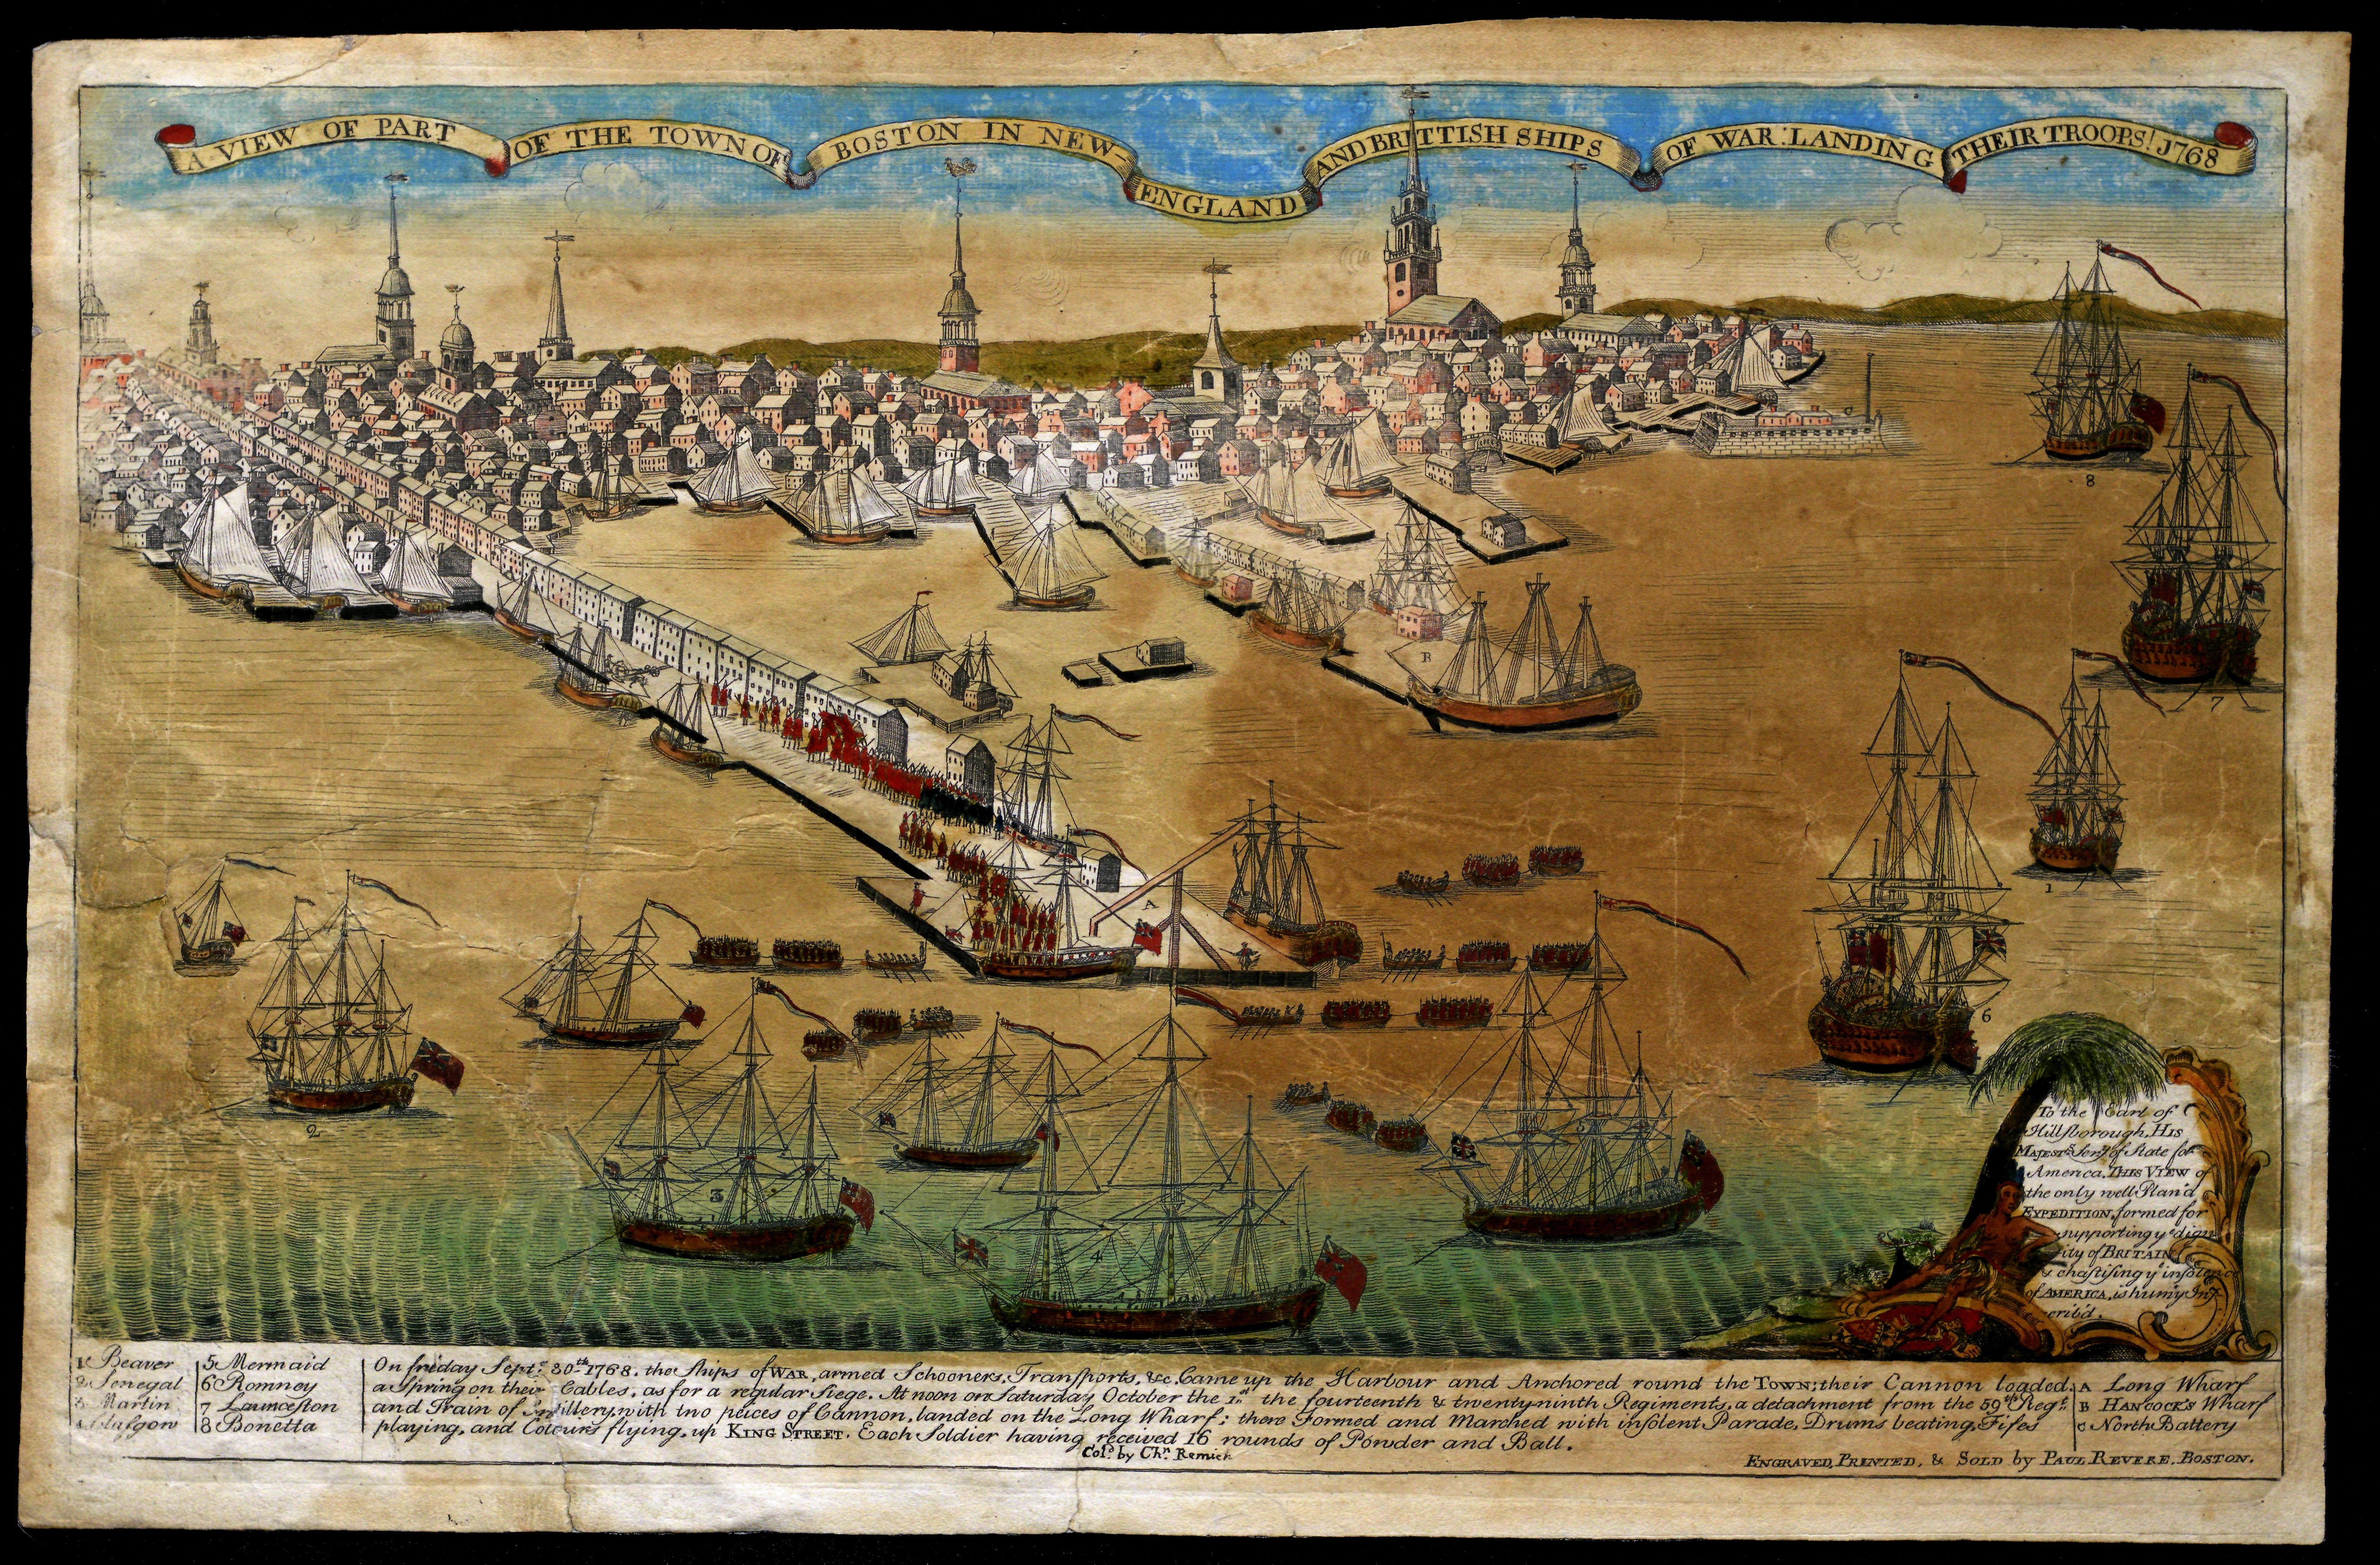 Paul Revere, "A View of Part of the Town of Boston in New England and Brittish Ships of War Landing Their Troops, 1768," Boston, 1770. (The Gilder Lehrman Institute, GLC02873)